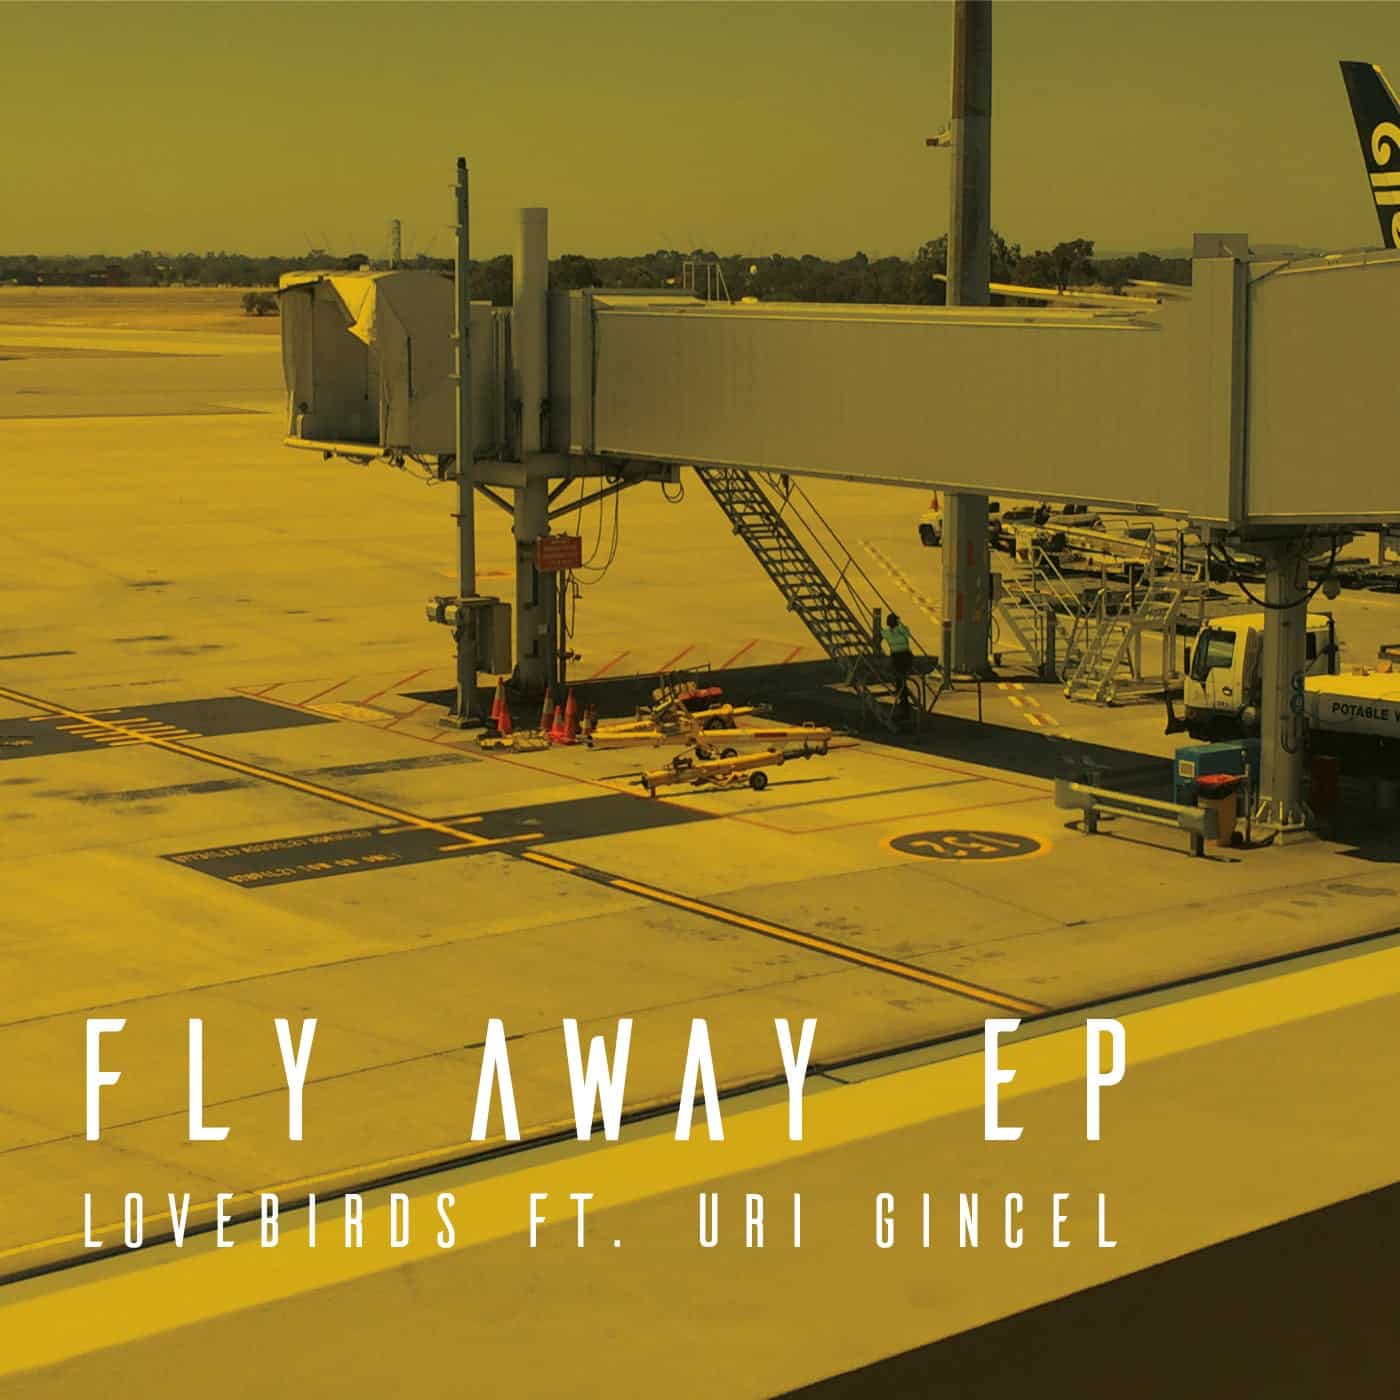 Download Lovebirds, Uri Gincel - Fly Away - EP on Electrobuzz